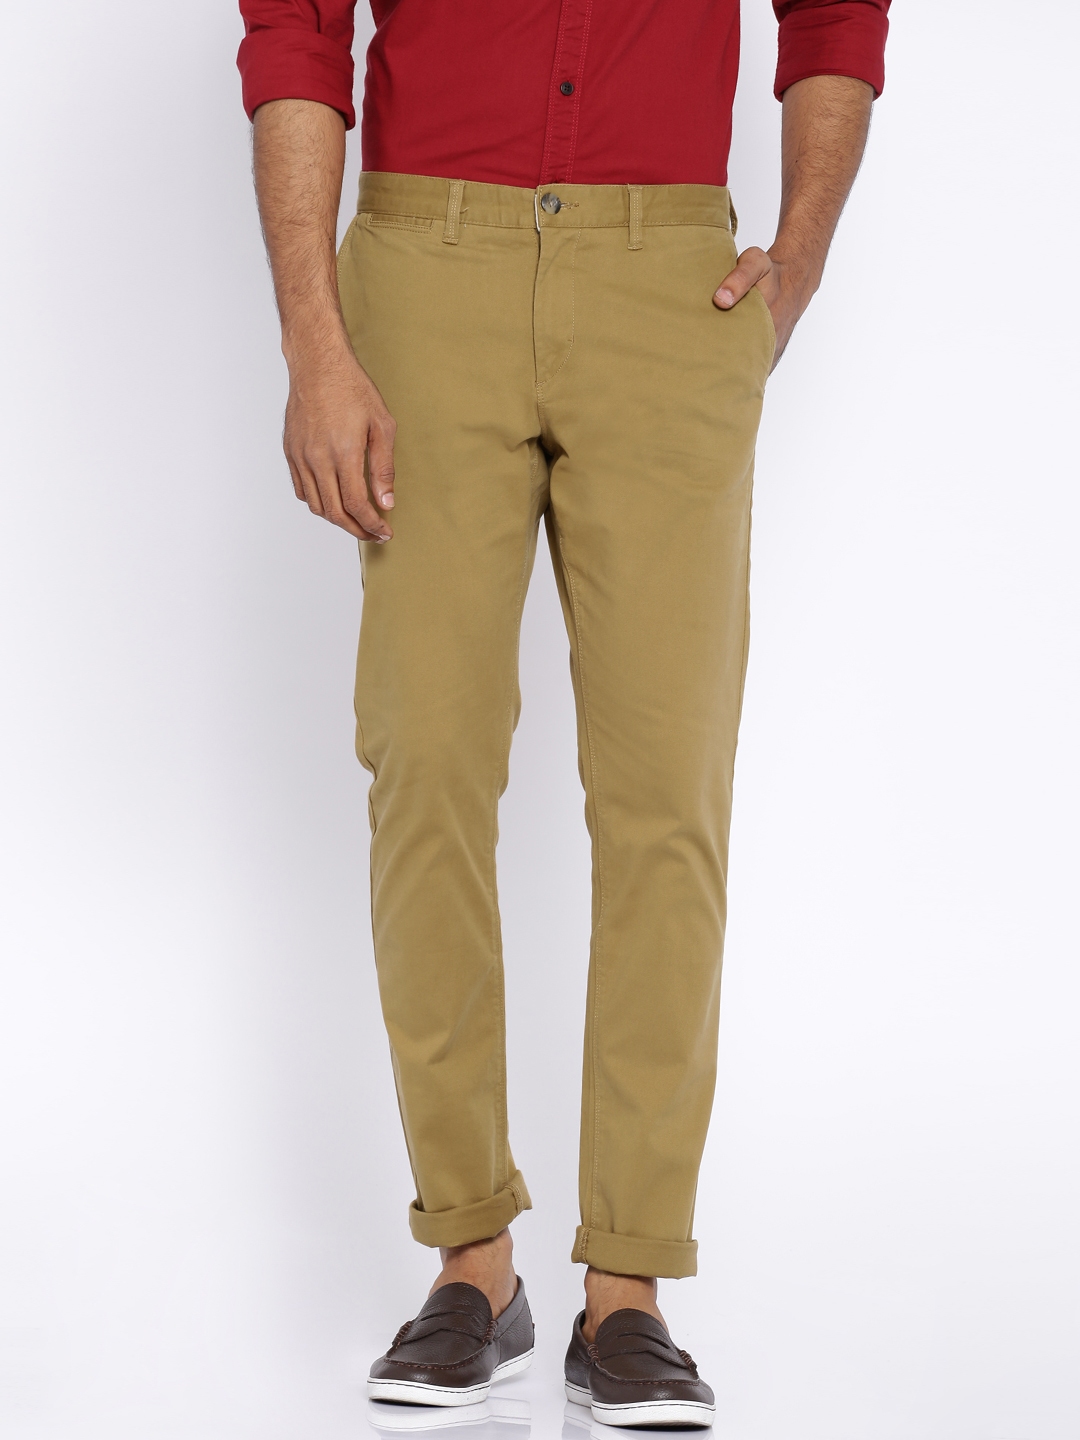 Buy U.S. Polo Assn. Khaki Slim Fit Chino Trousers - Trousers for Men ...